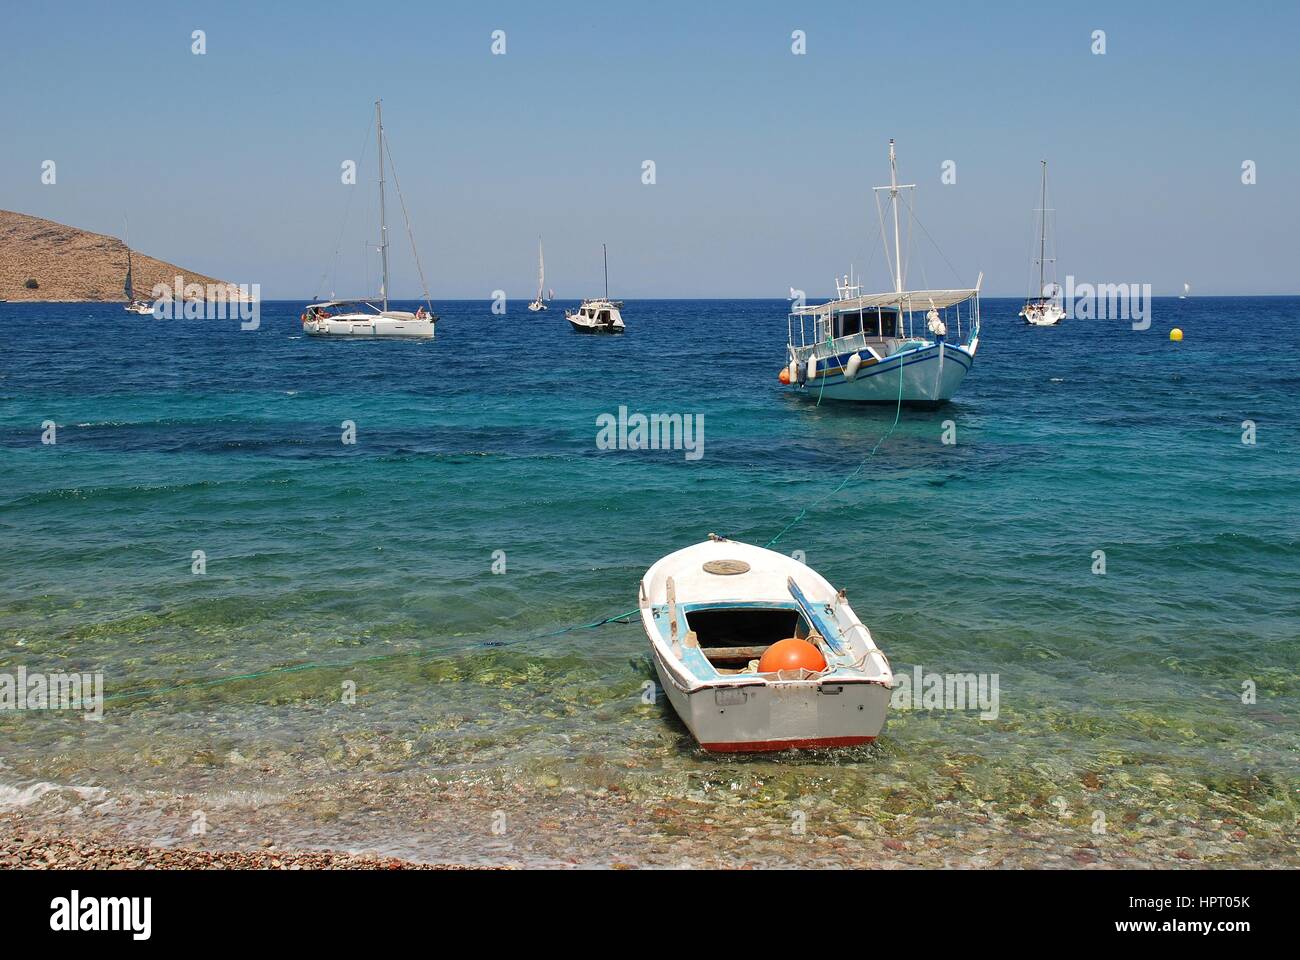 Small boats moored in Livadia harbour on the Greek island of Tilos on July 19, 2016. The 14.5km long island has a population of around 780 people. Stock Photo